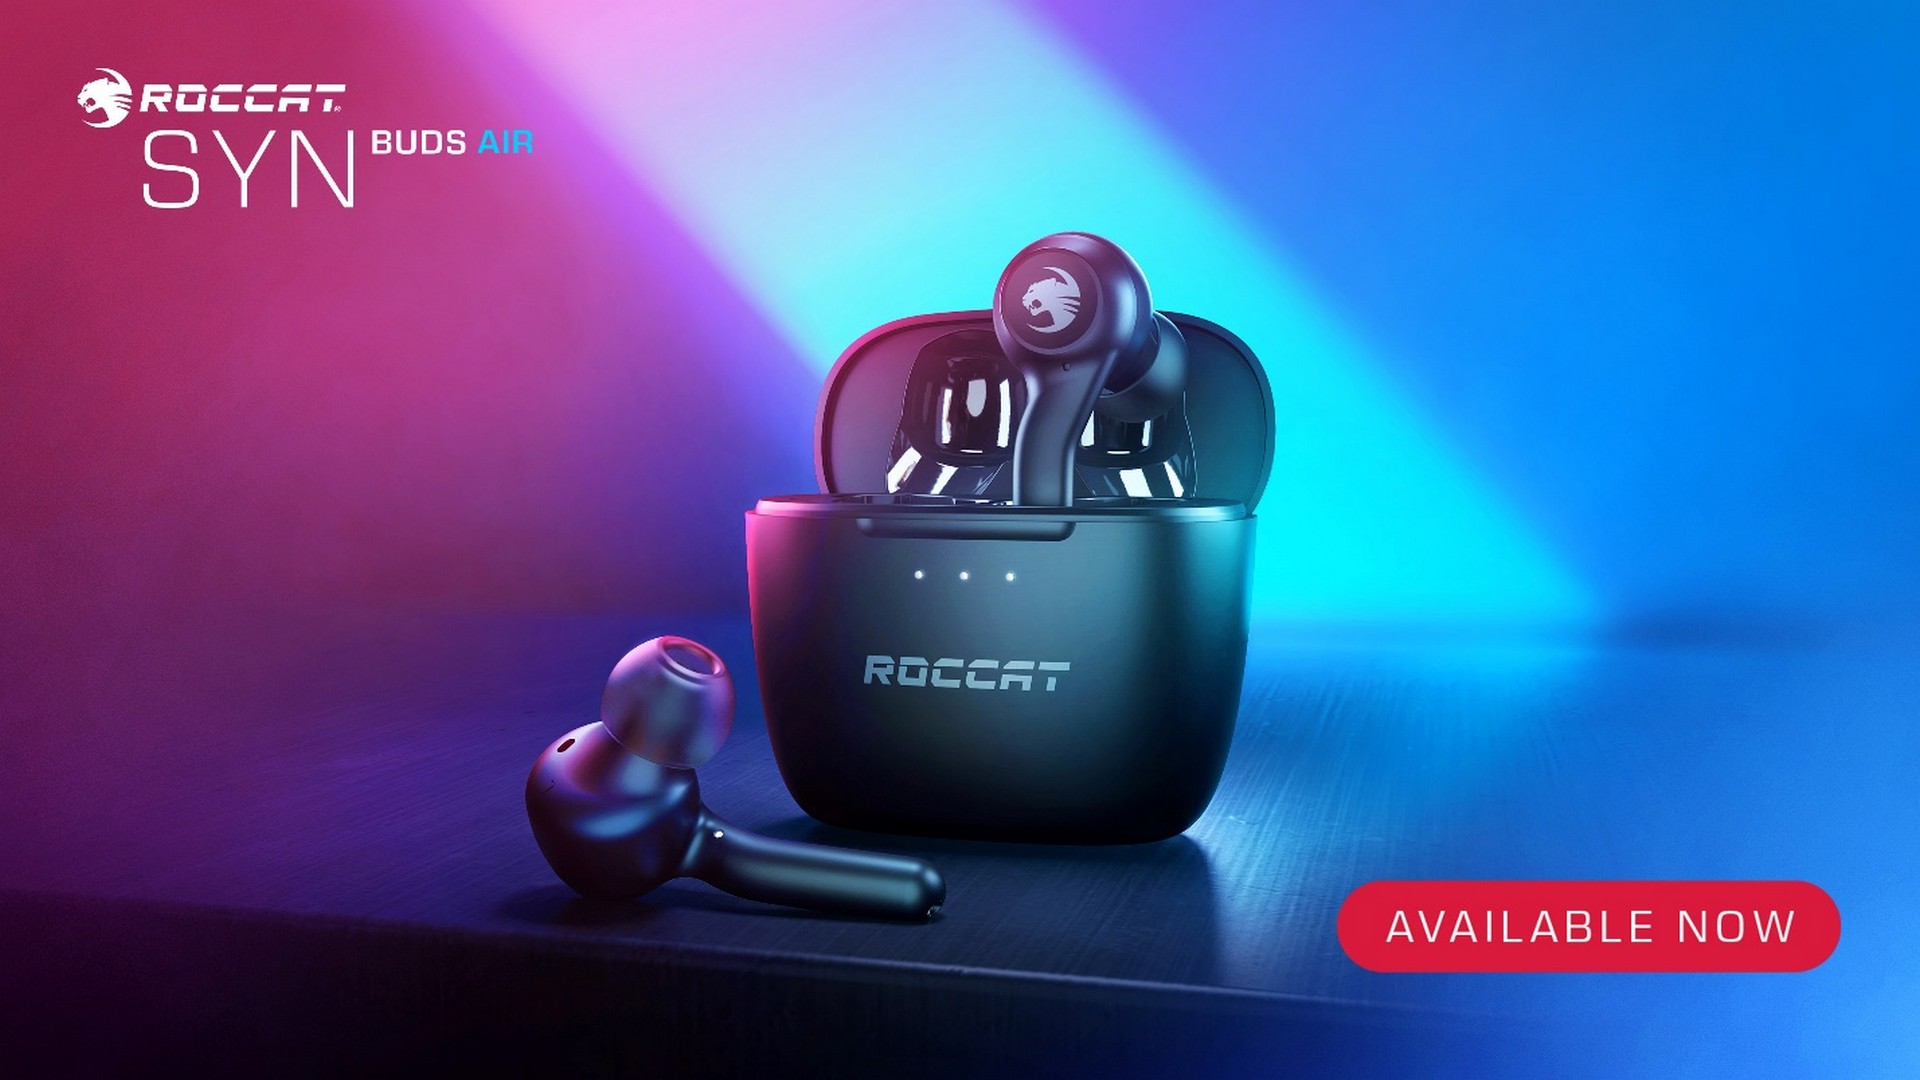 The All-New SCOUT AIR & SYN BUDS AIR True Wireless Earbuds From Turtle Beach & Roccat Are Out Now